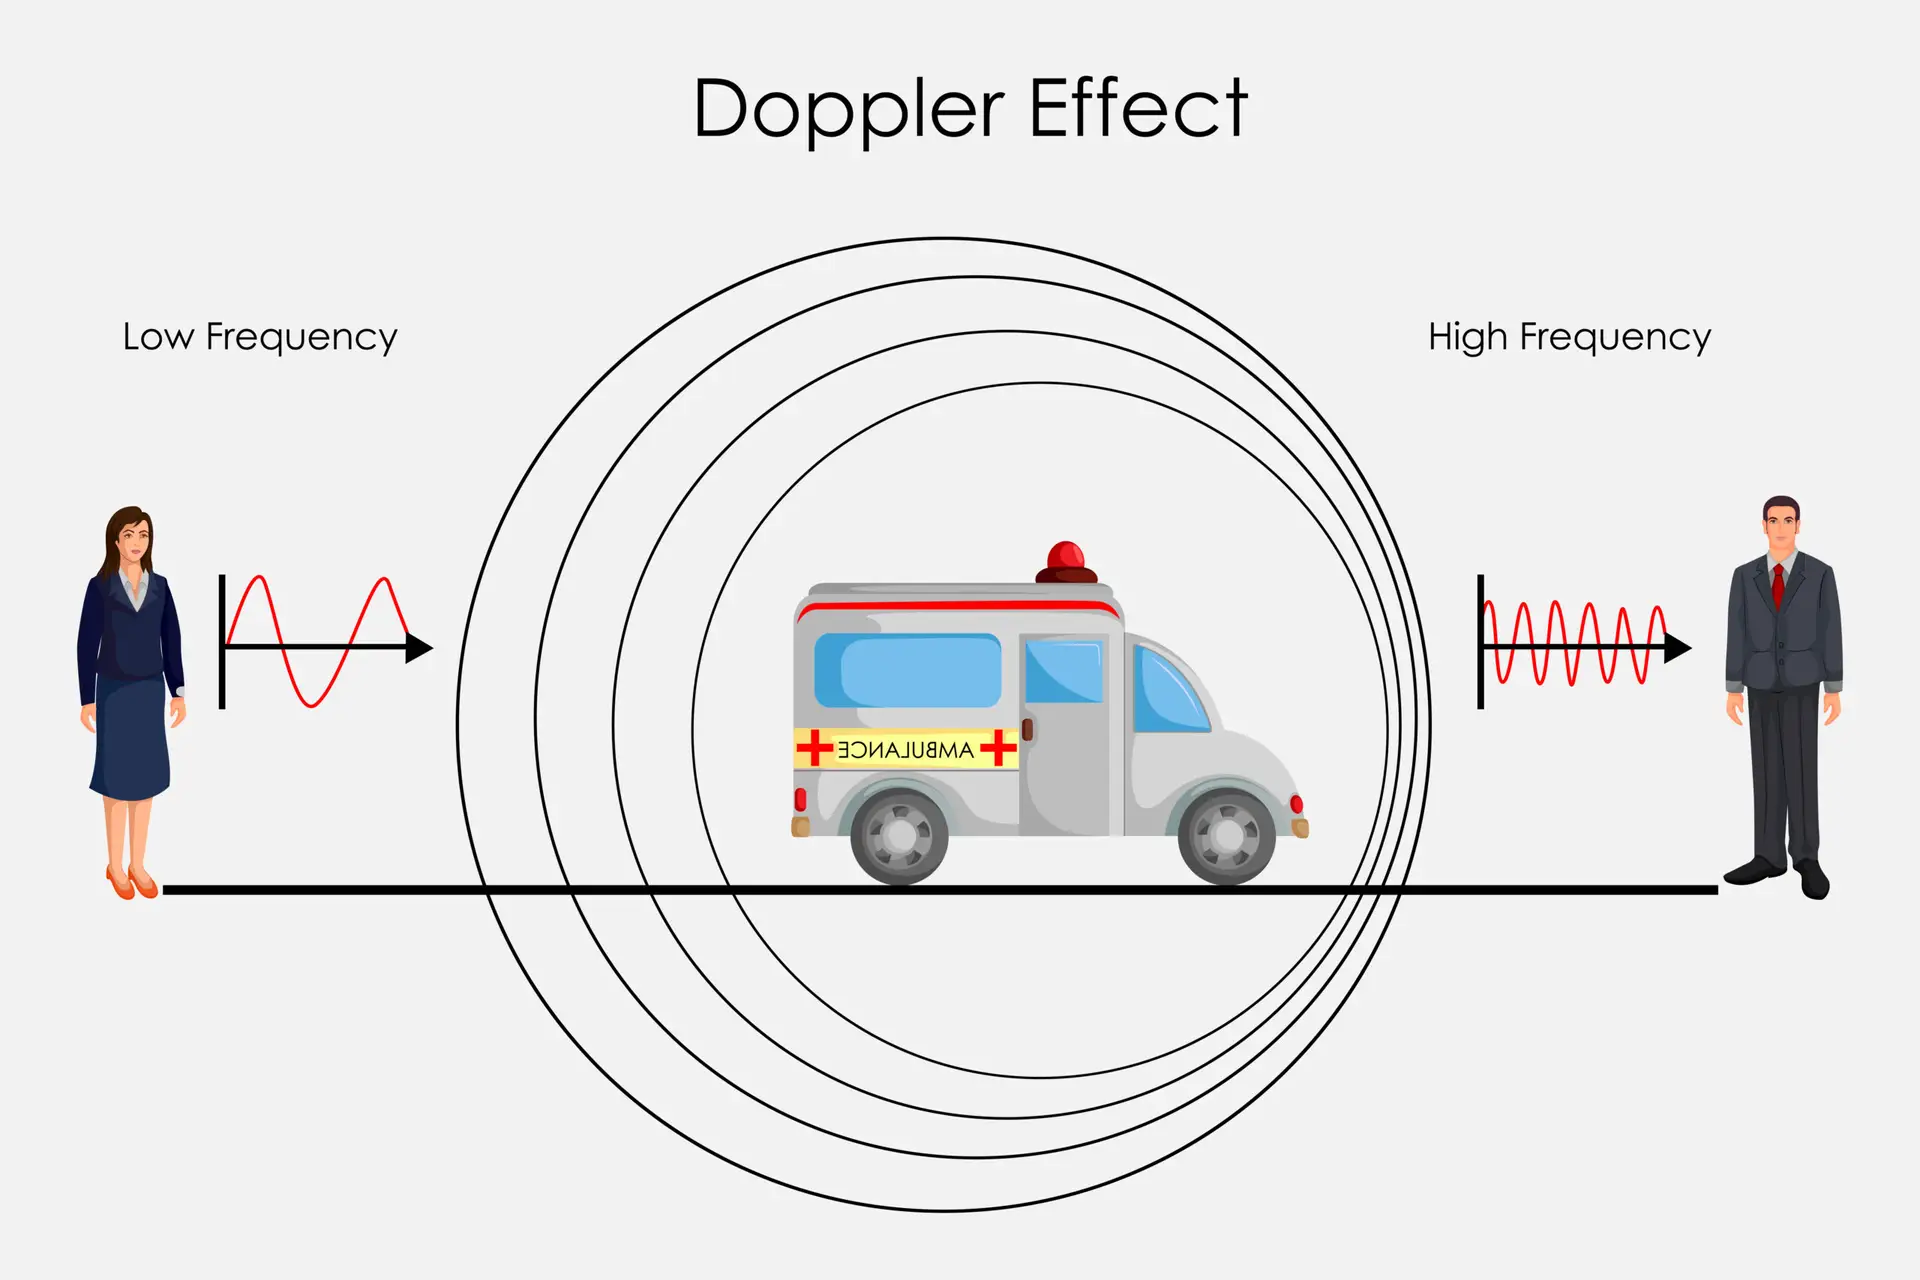 Illustration showing the Doppler Effect with an ambulance in the center, sound waves compressed towards a man representing high frequency, and expanded towards a woman representing low frequency.